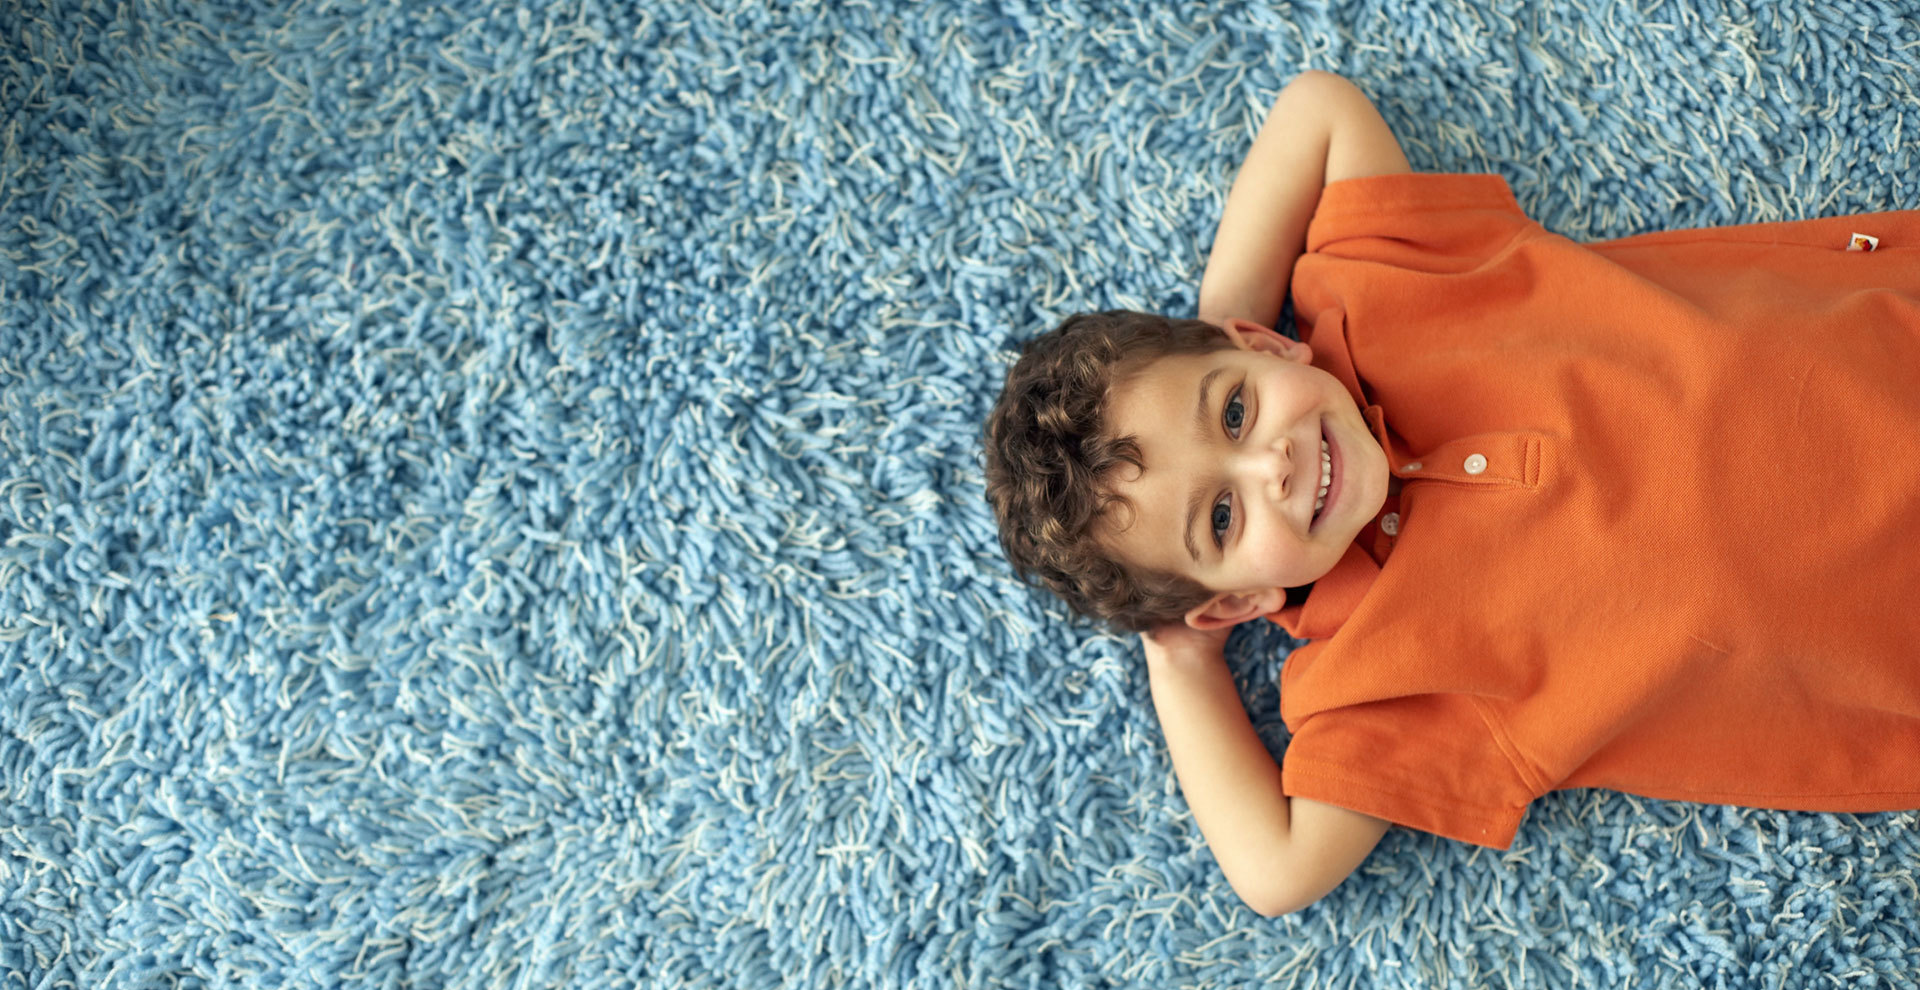 Young Child Laying on Residential Carpet